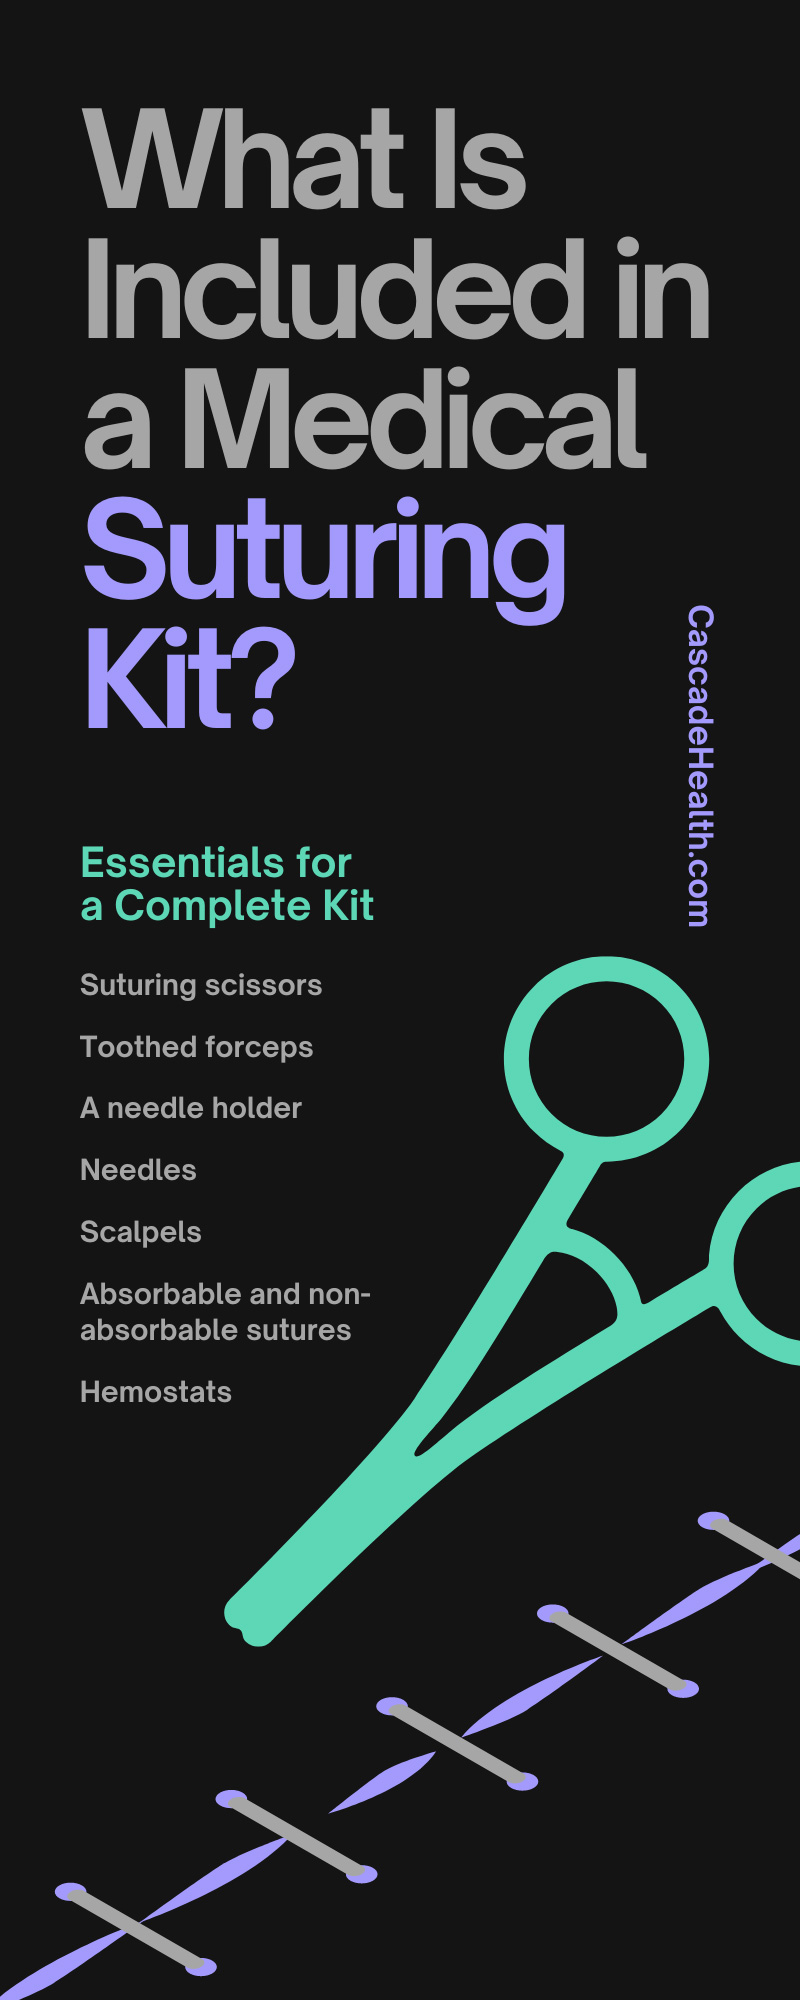 What Is Included in a Medical Suturing Kit?